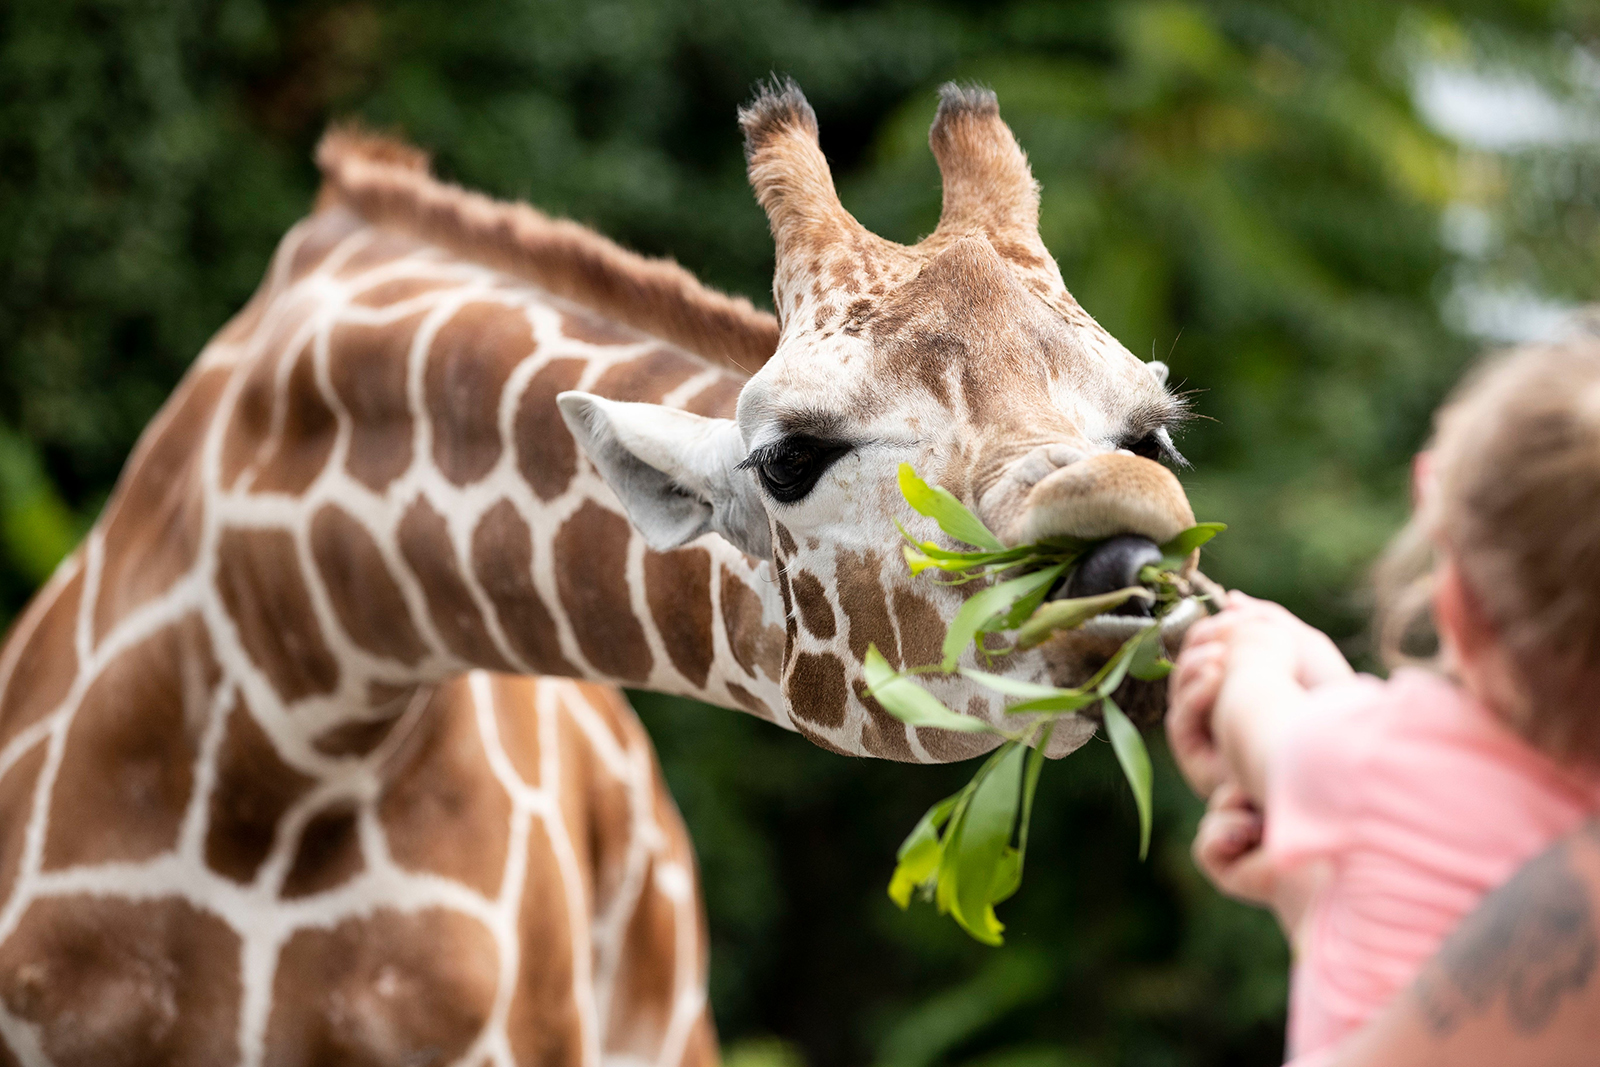 A giraffe being fed a branch by zoo-goers